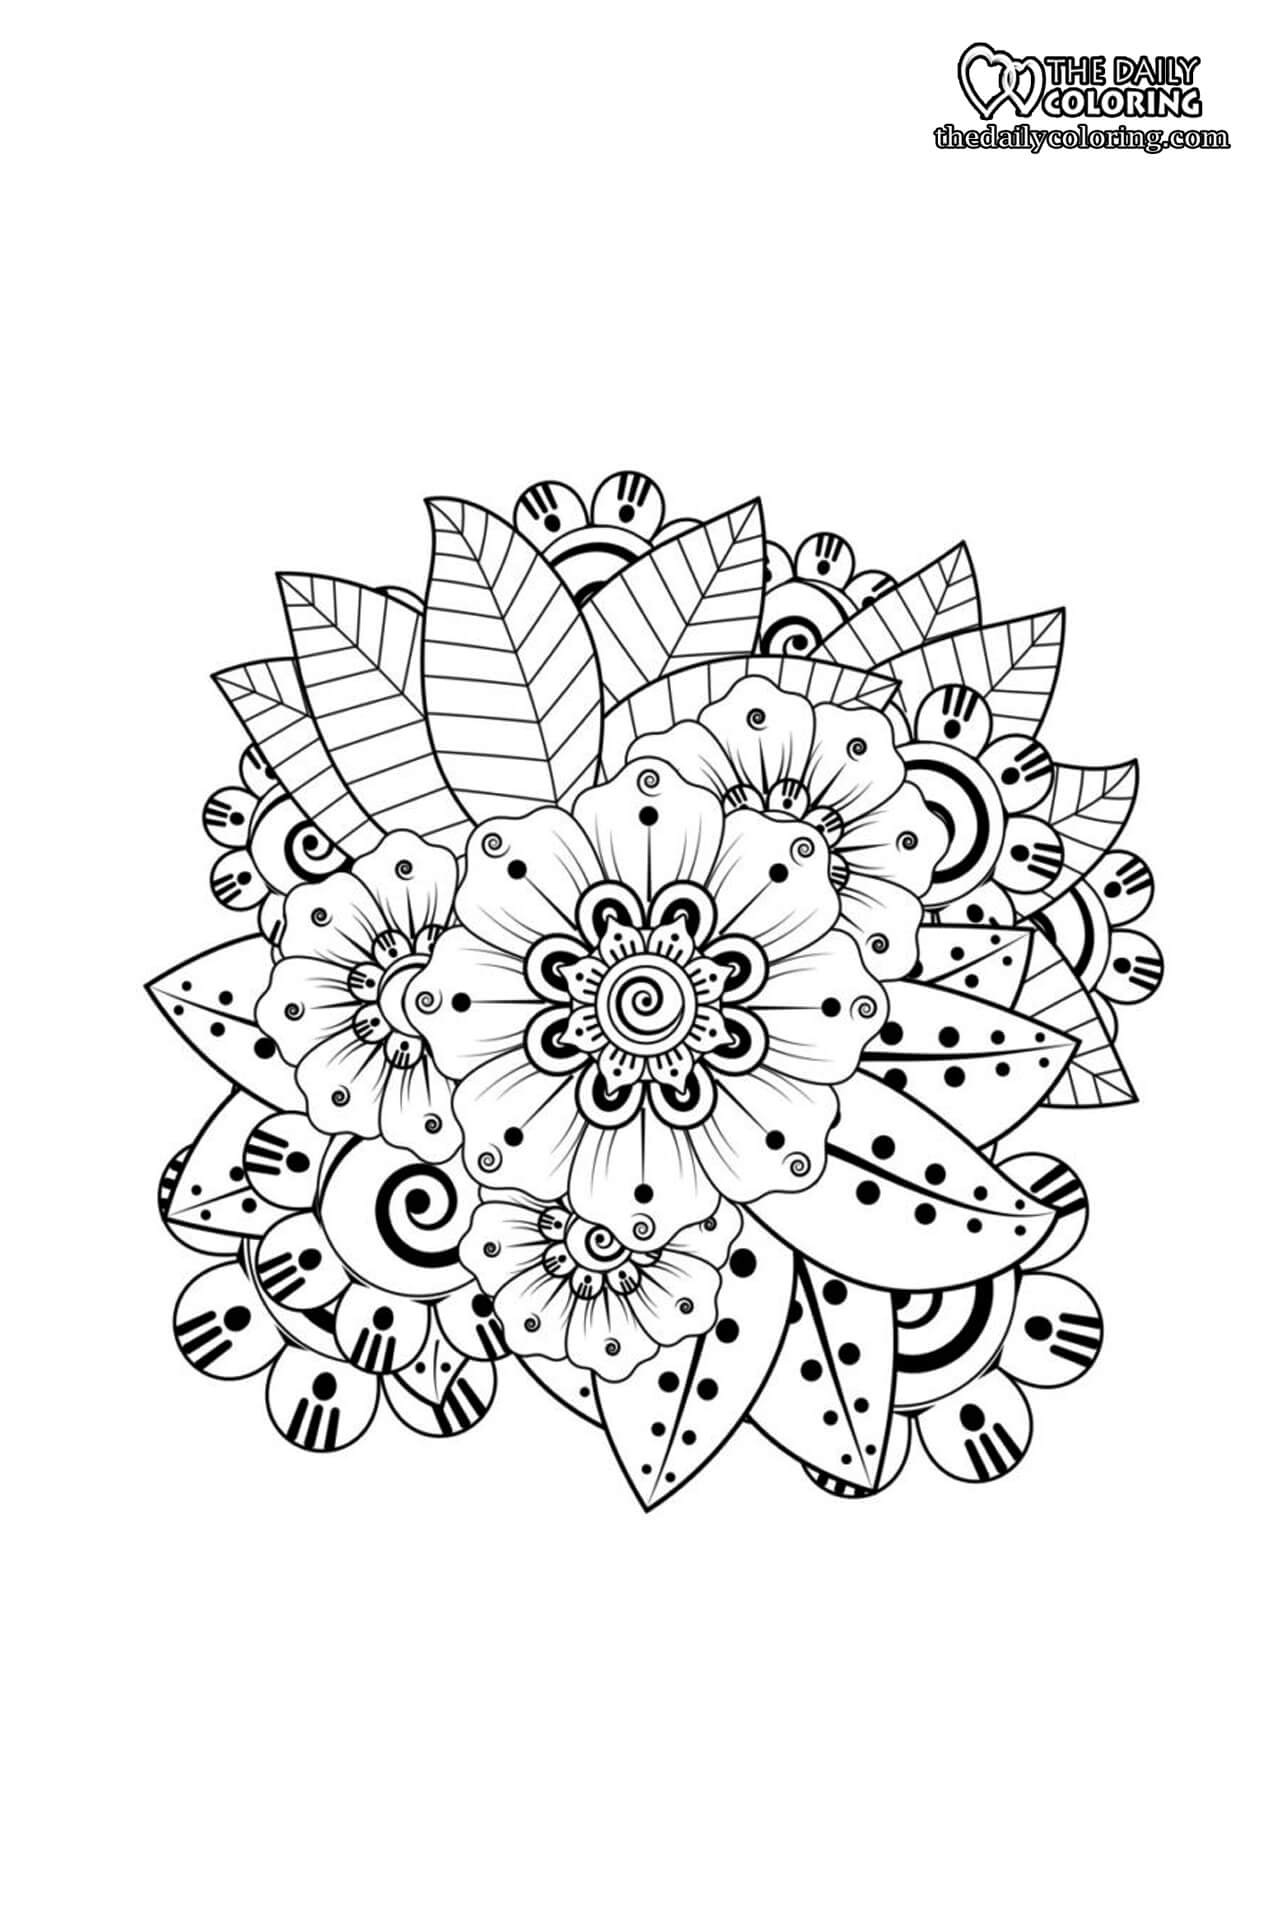 Easy Mandala Coloring Pages   The Daily Coloring